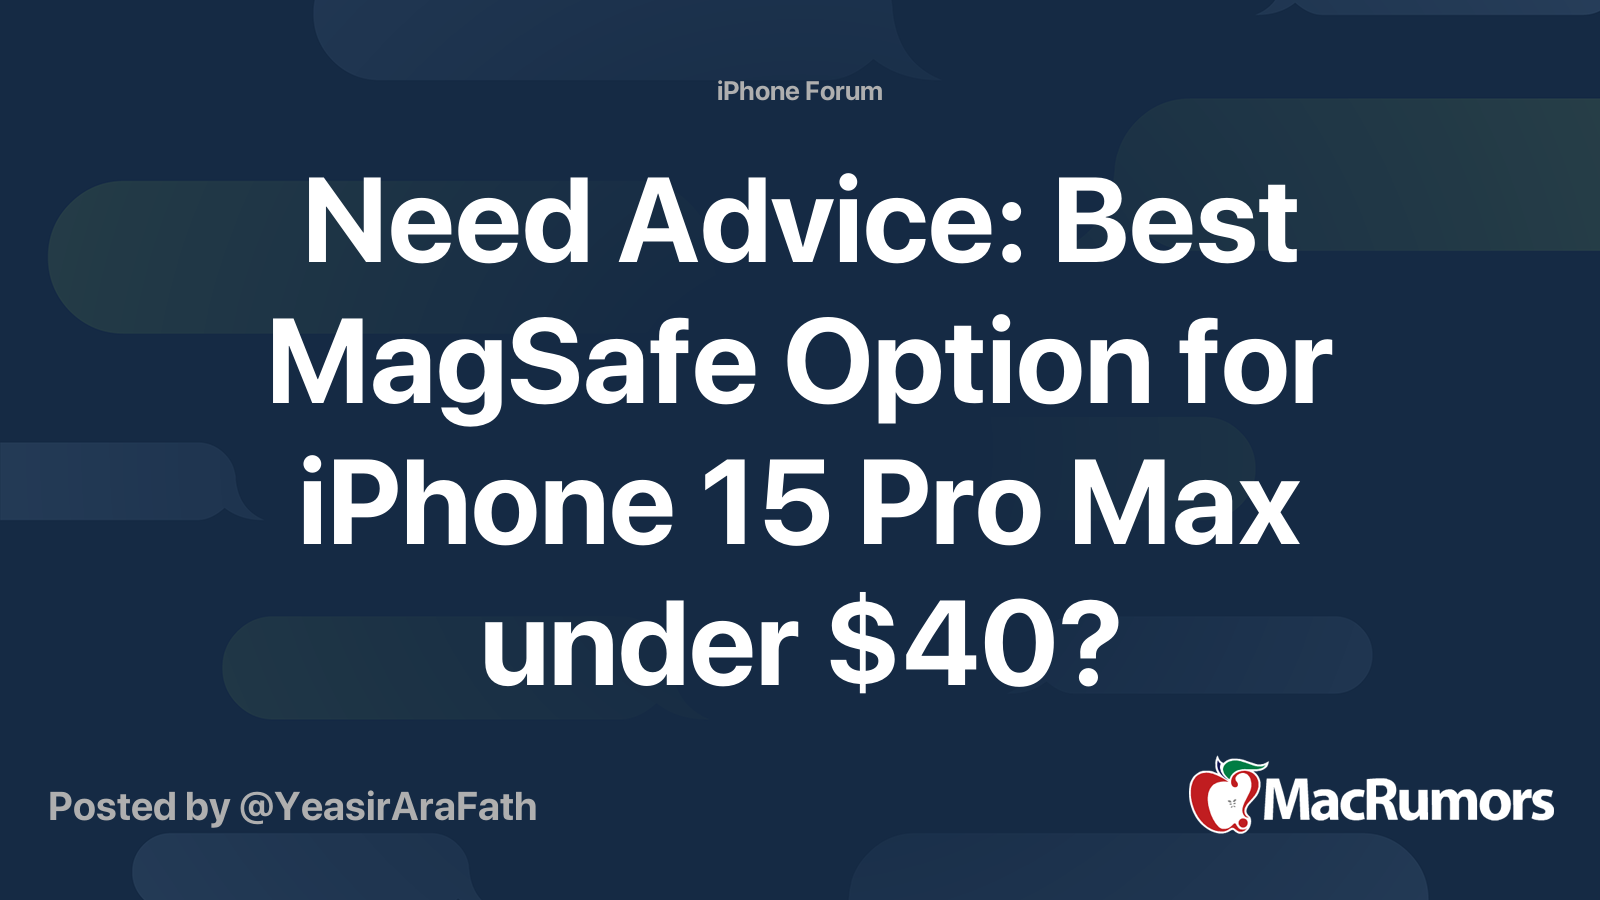 Need Advice: Best MagSafe Option for iPhone 15 Pro Max under $40?